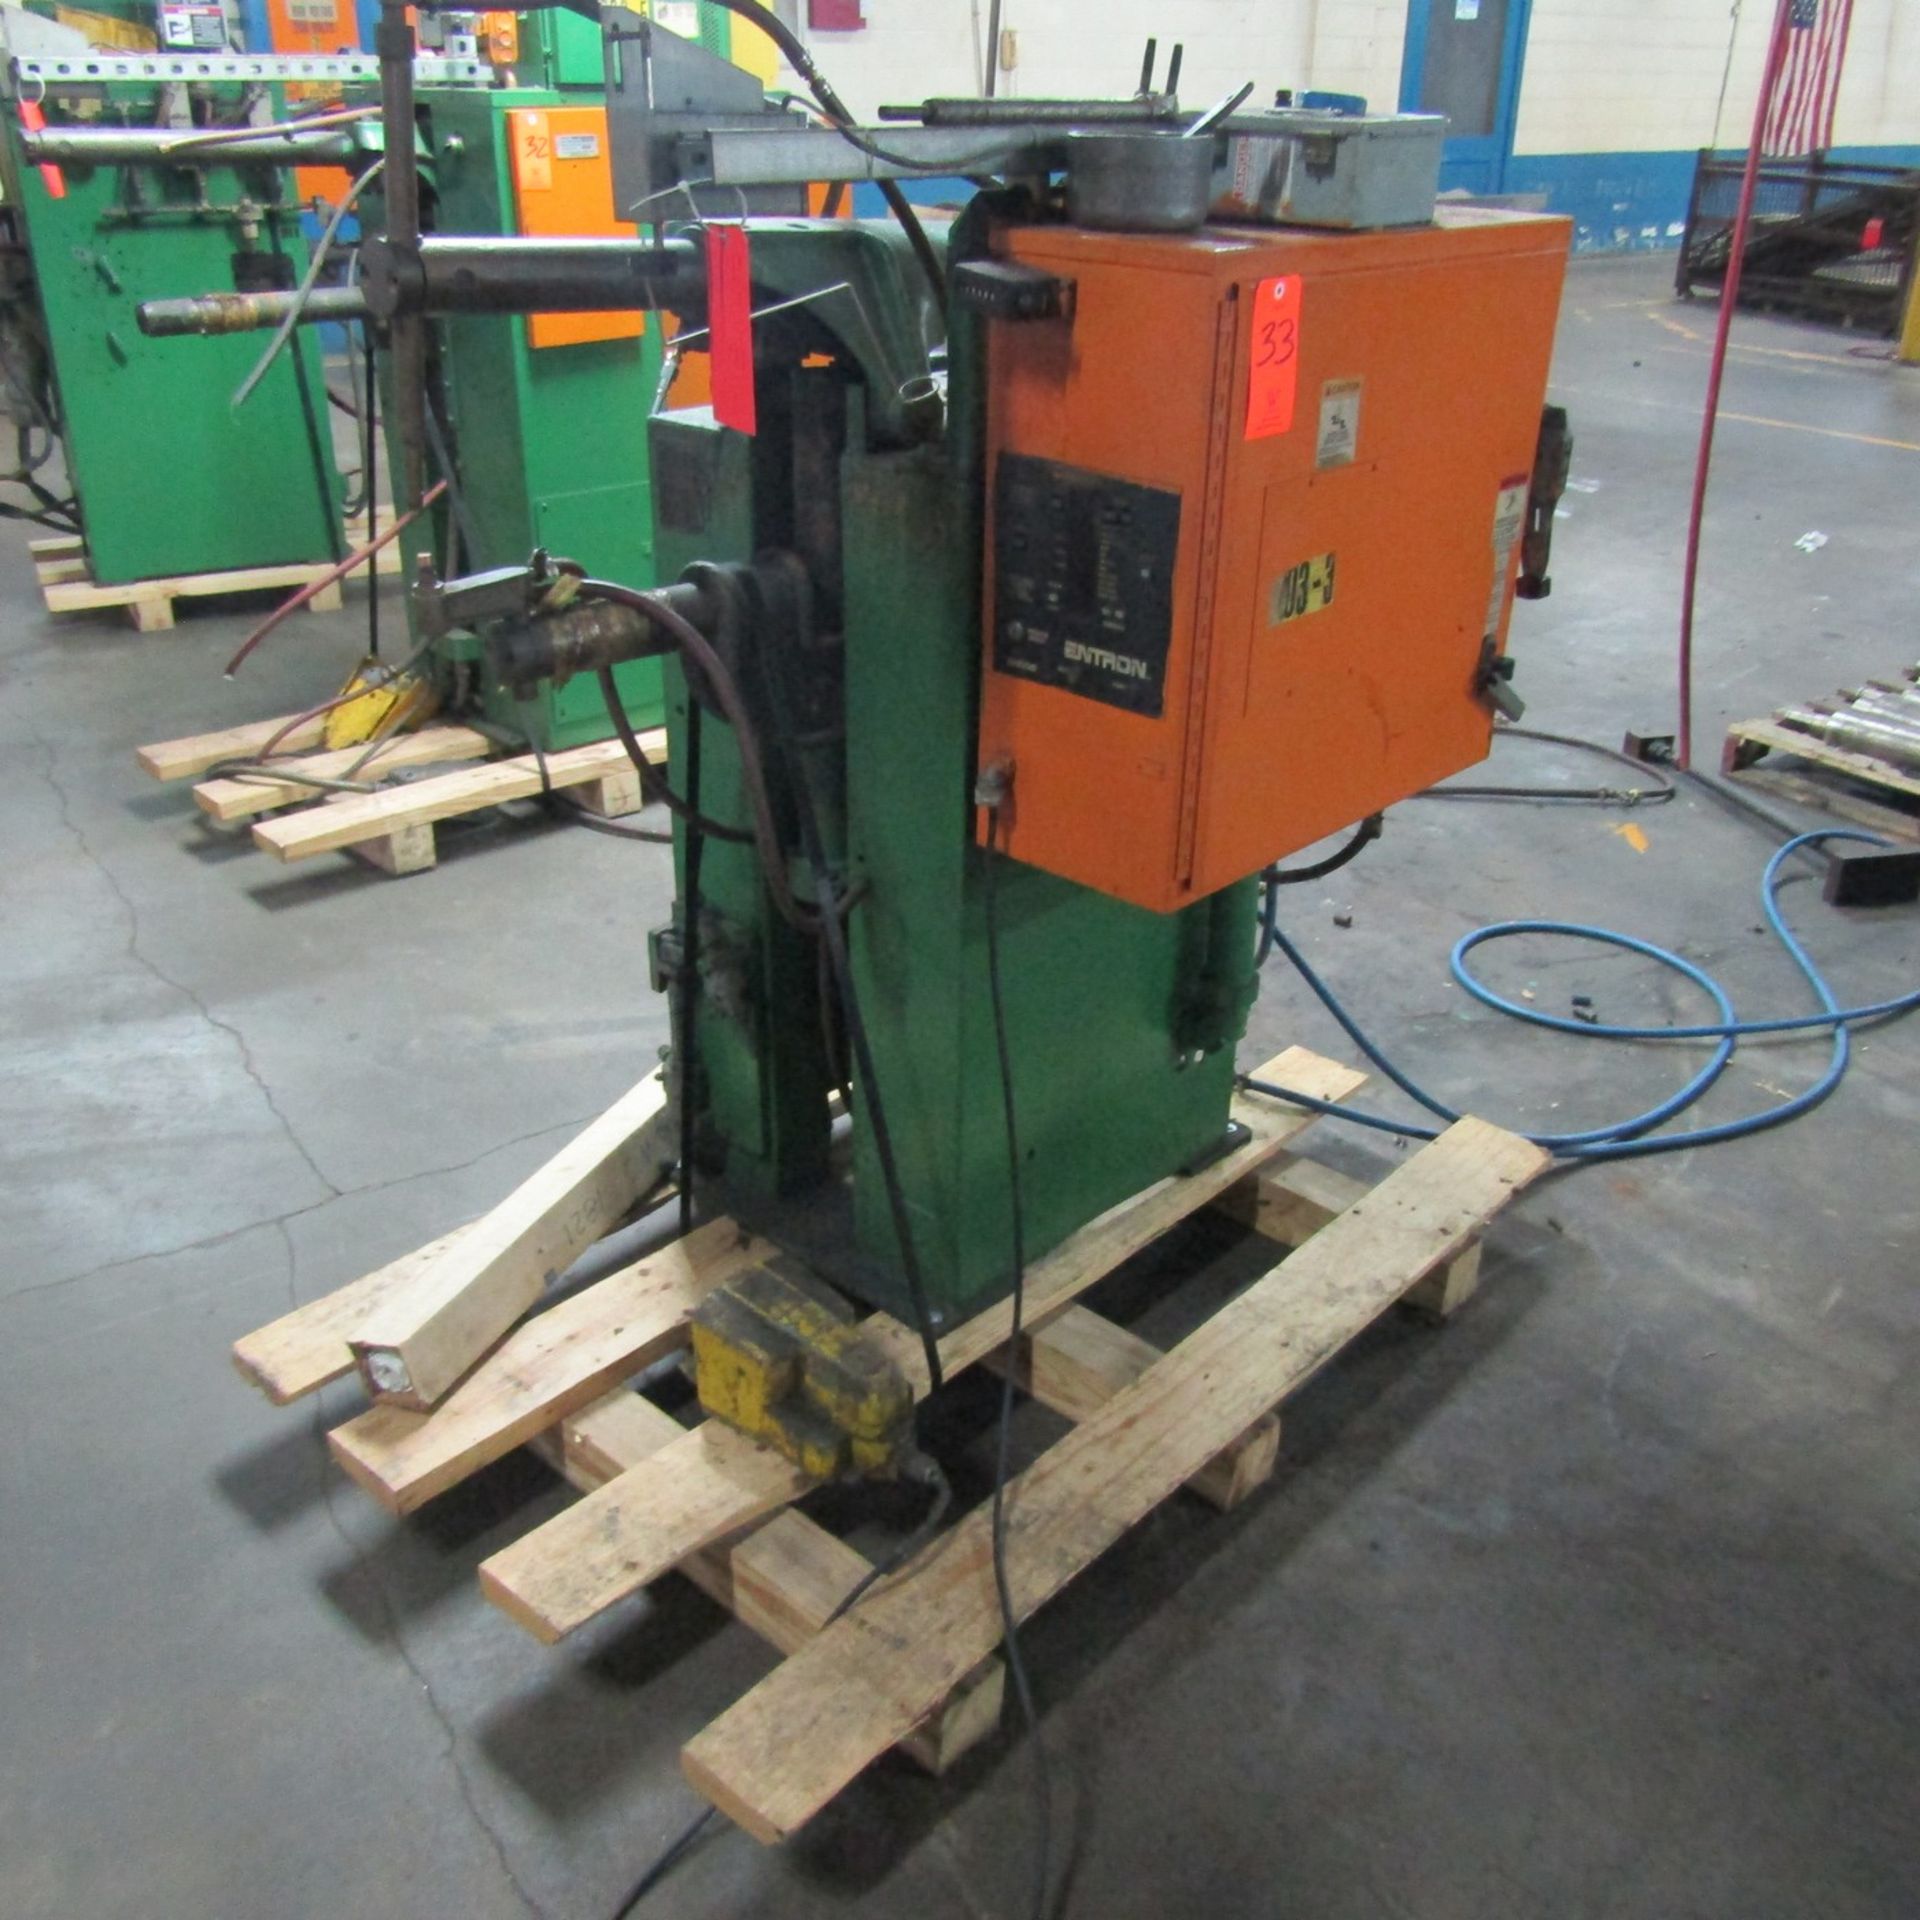 Taylor Winfield 50-KVA Model NB-24-50AIR Spot Welder, S/N: 62173; with Entron Controls, 18 in. - Image 2 of 5